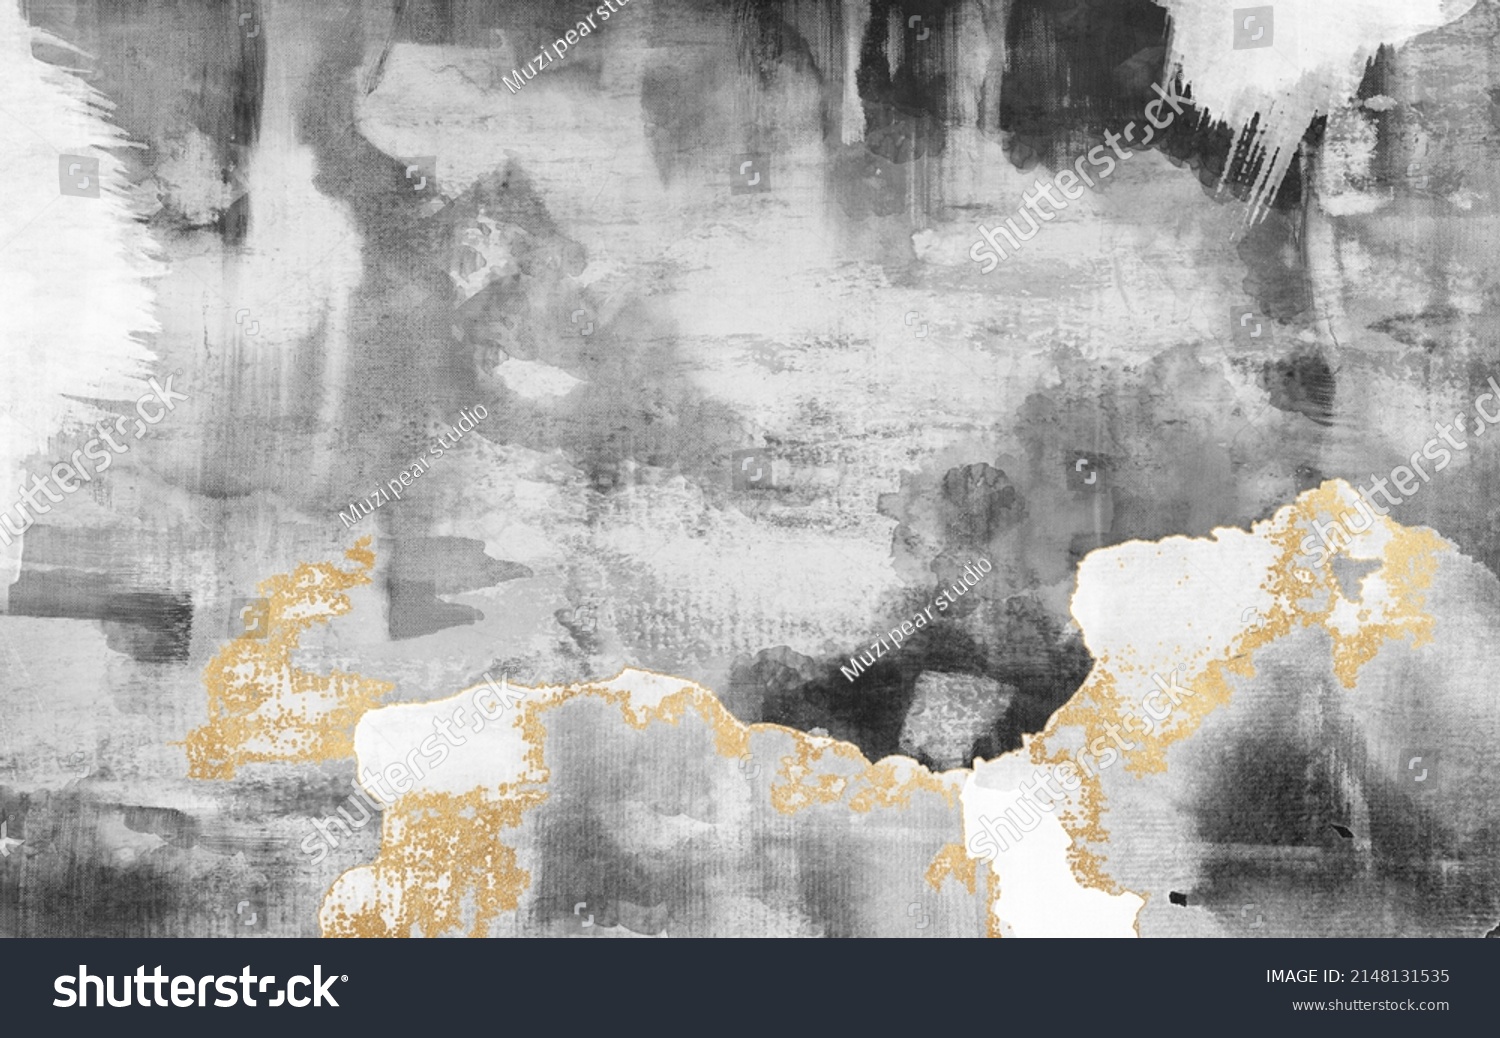 High resolution. Abstract art, modern painting, wall art, a mixture of gray and gold paint. Background design, used for wallpaper design of prints, carpets, banners, decorative paintings, art and home #2148131535